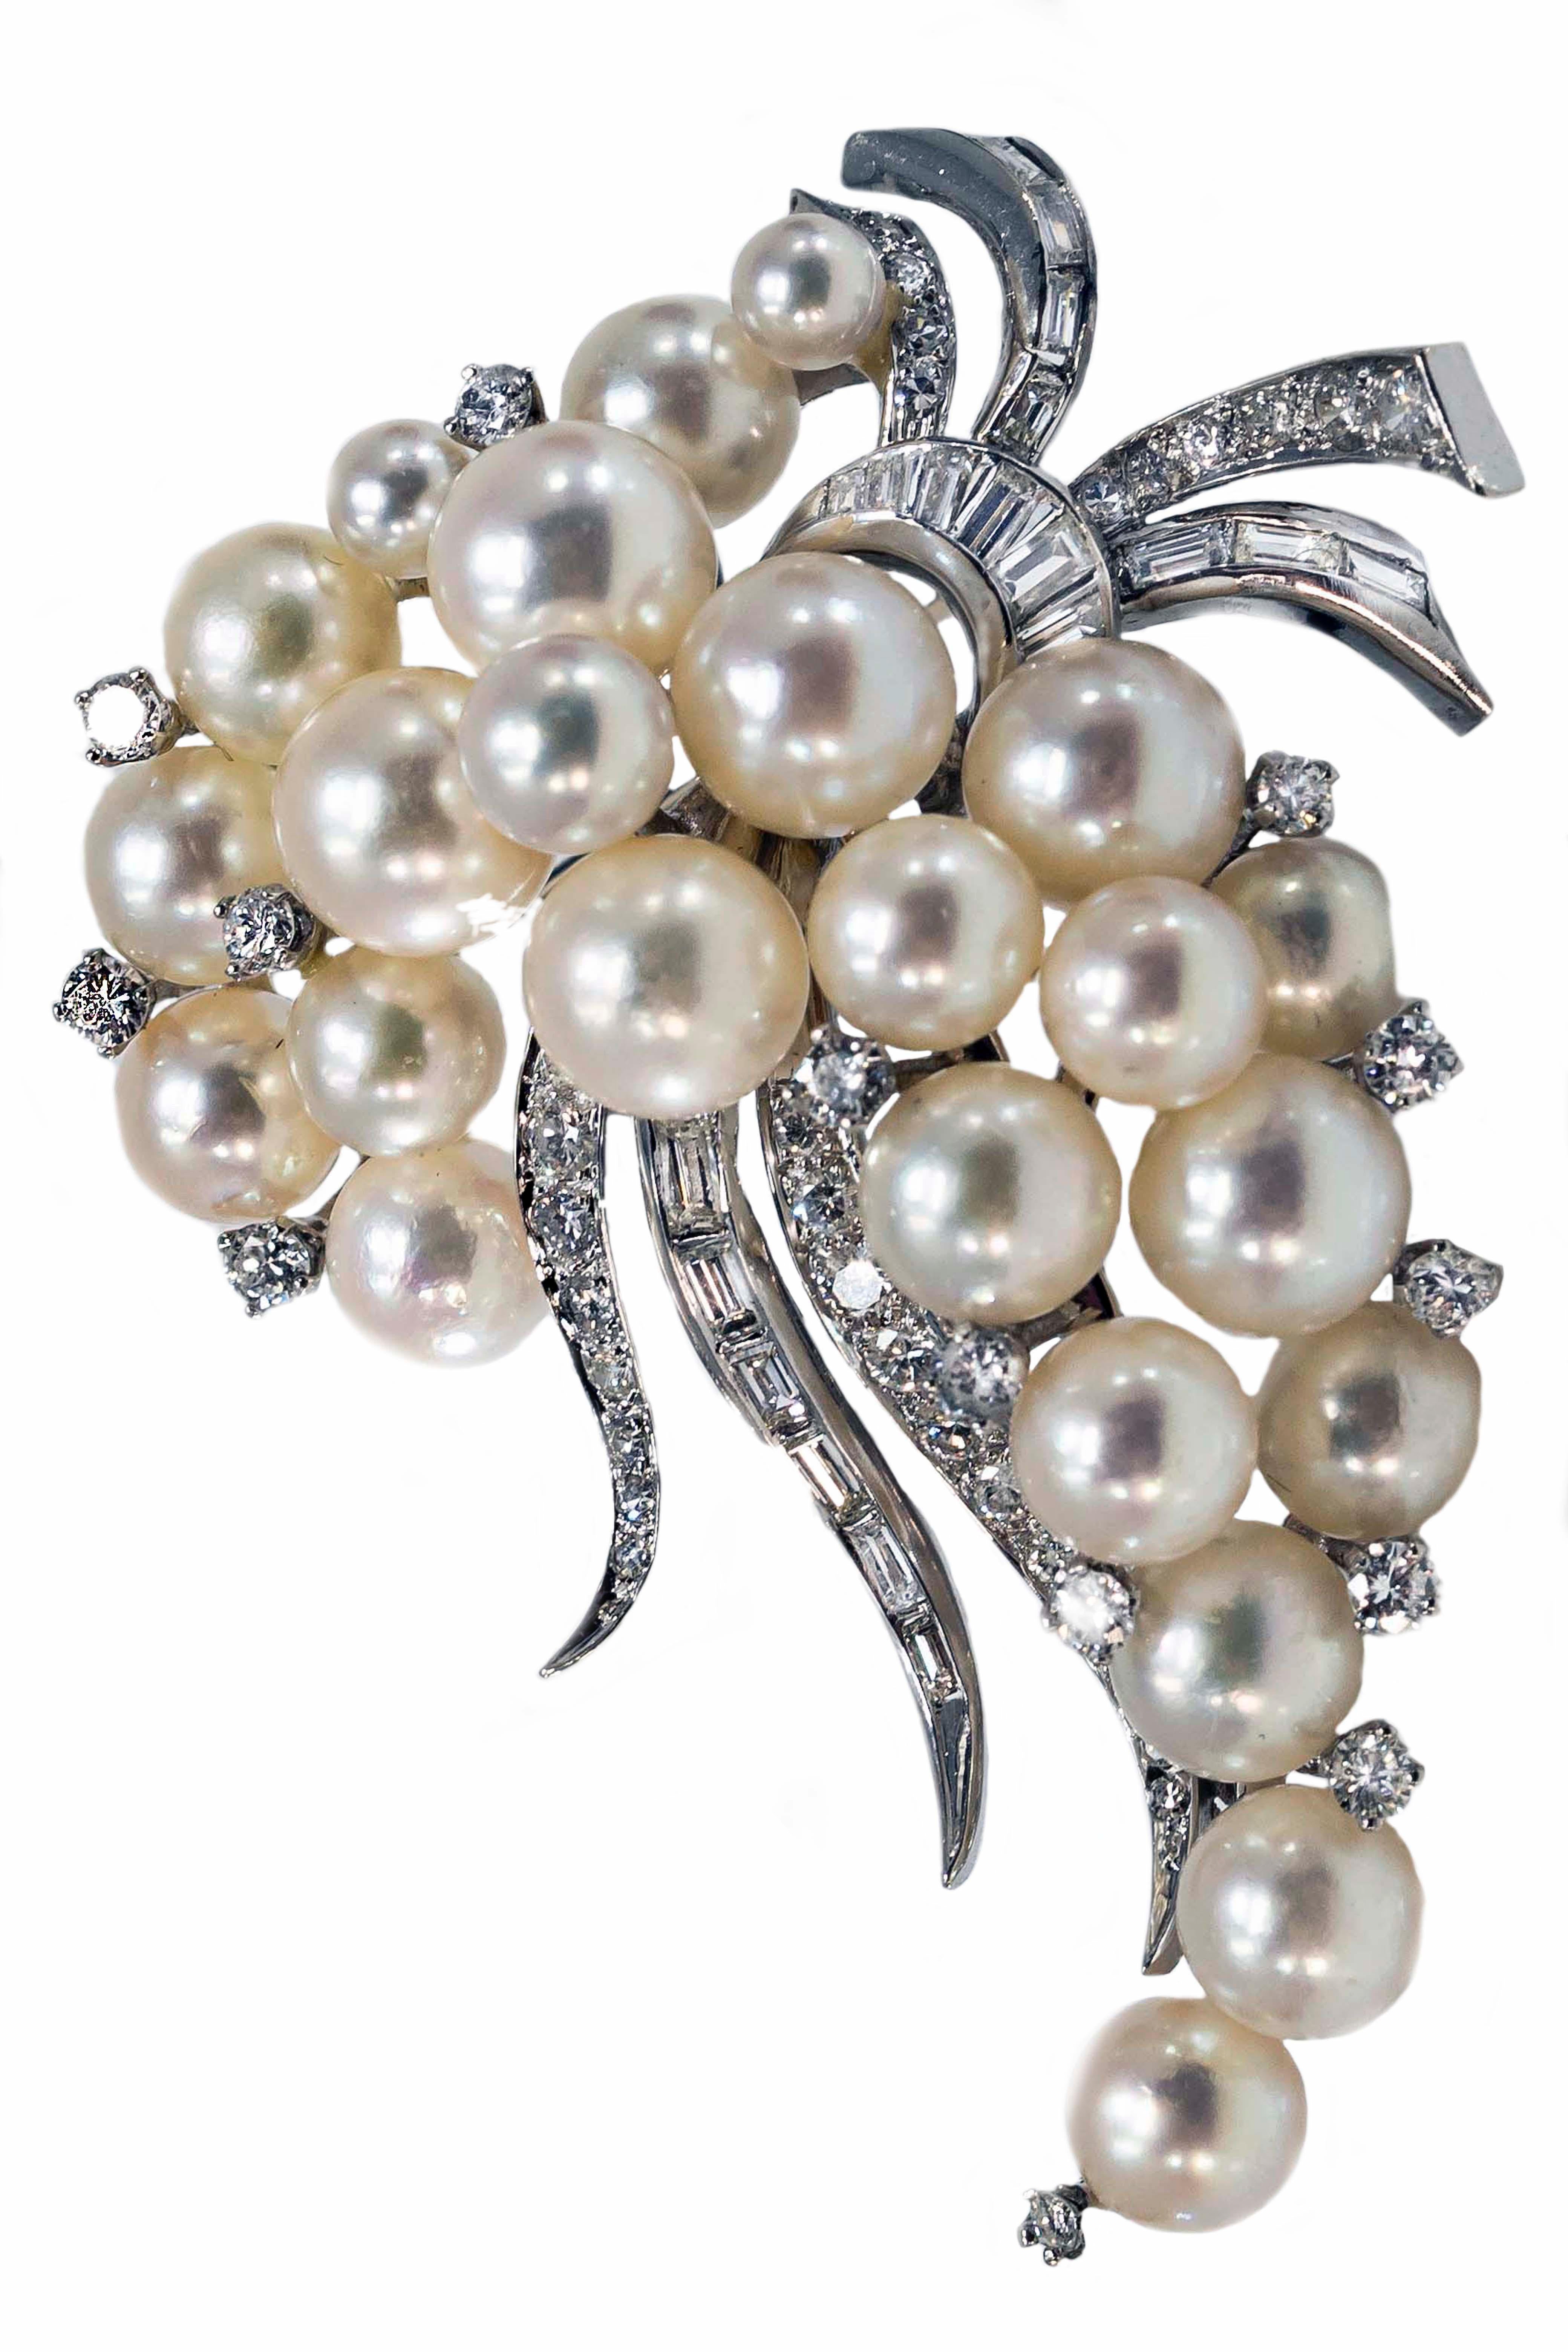 A White Gold Pearl and Diamond Set Pin Cornucopia, a symbol of plenty consisting of a goat's horn overflowing with flowers, fruit, and Corn 

65 diamonds weighing approximately 2.27 carats decorated with 24 pearls. 

Brooch Dimensions : 

225 mm x